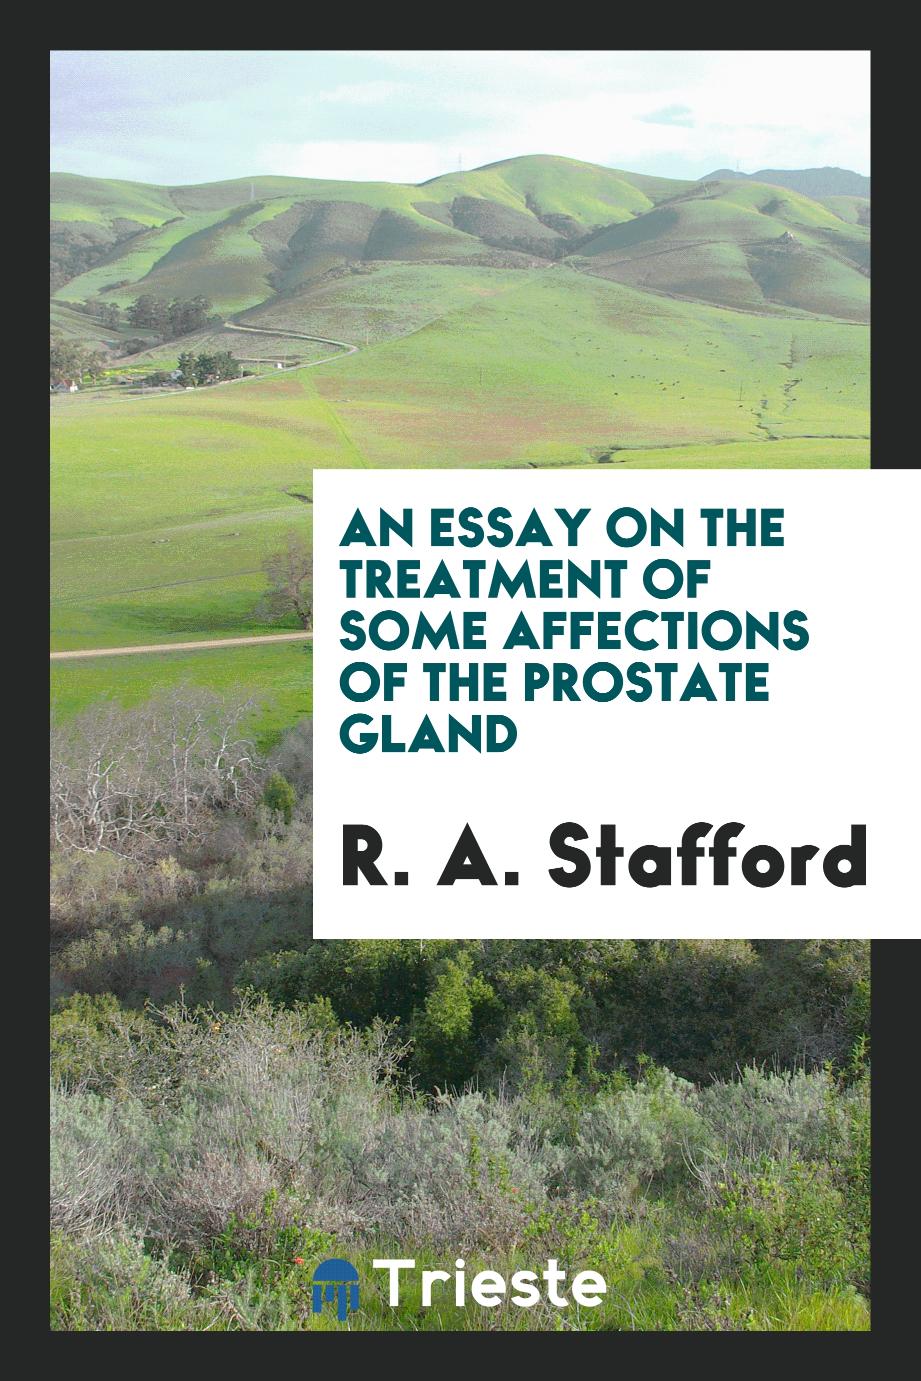 An Essay on the Treatment of Some Affections of the Prostate Gland